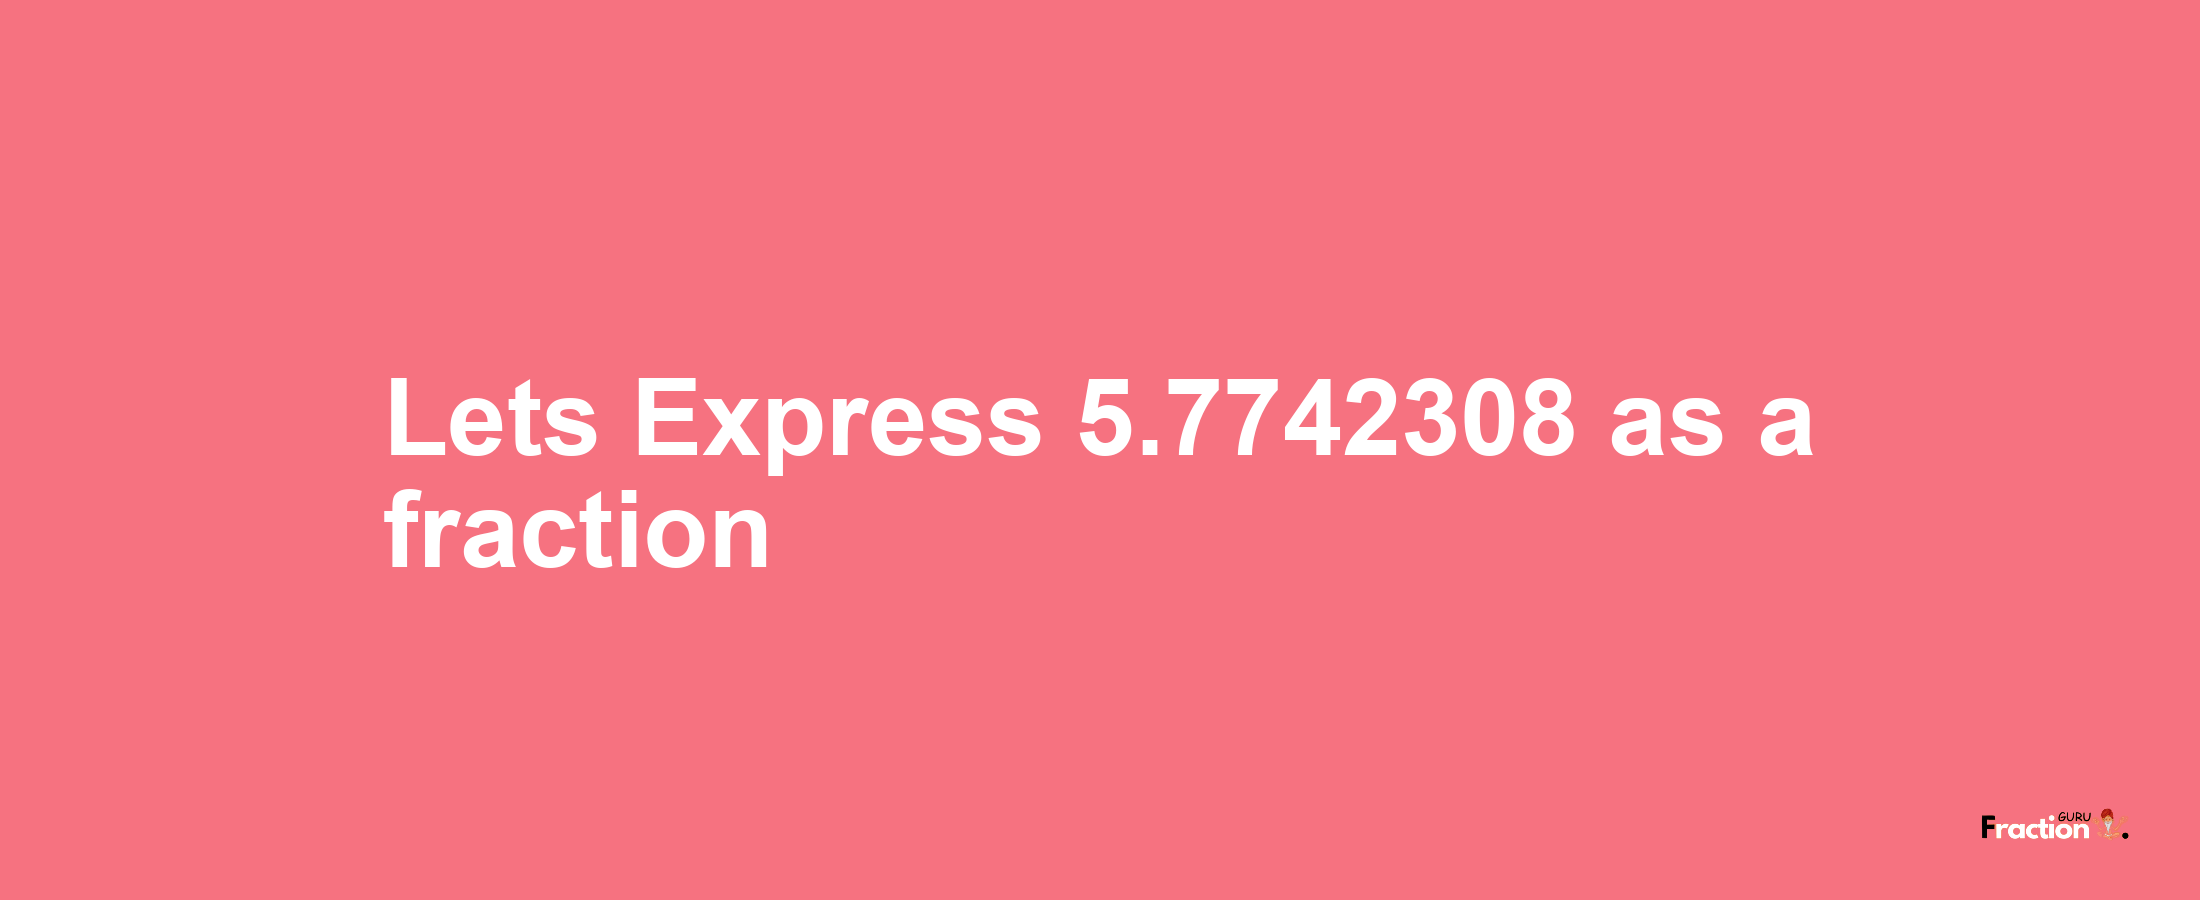 Lets Express 5.7742308 as afraction